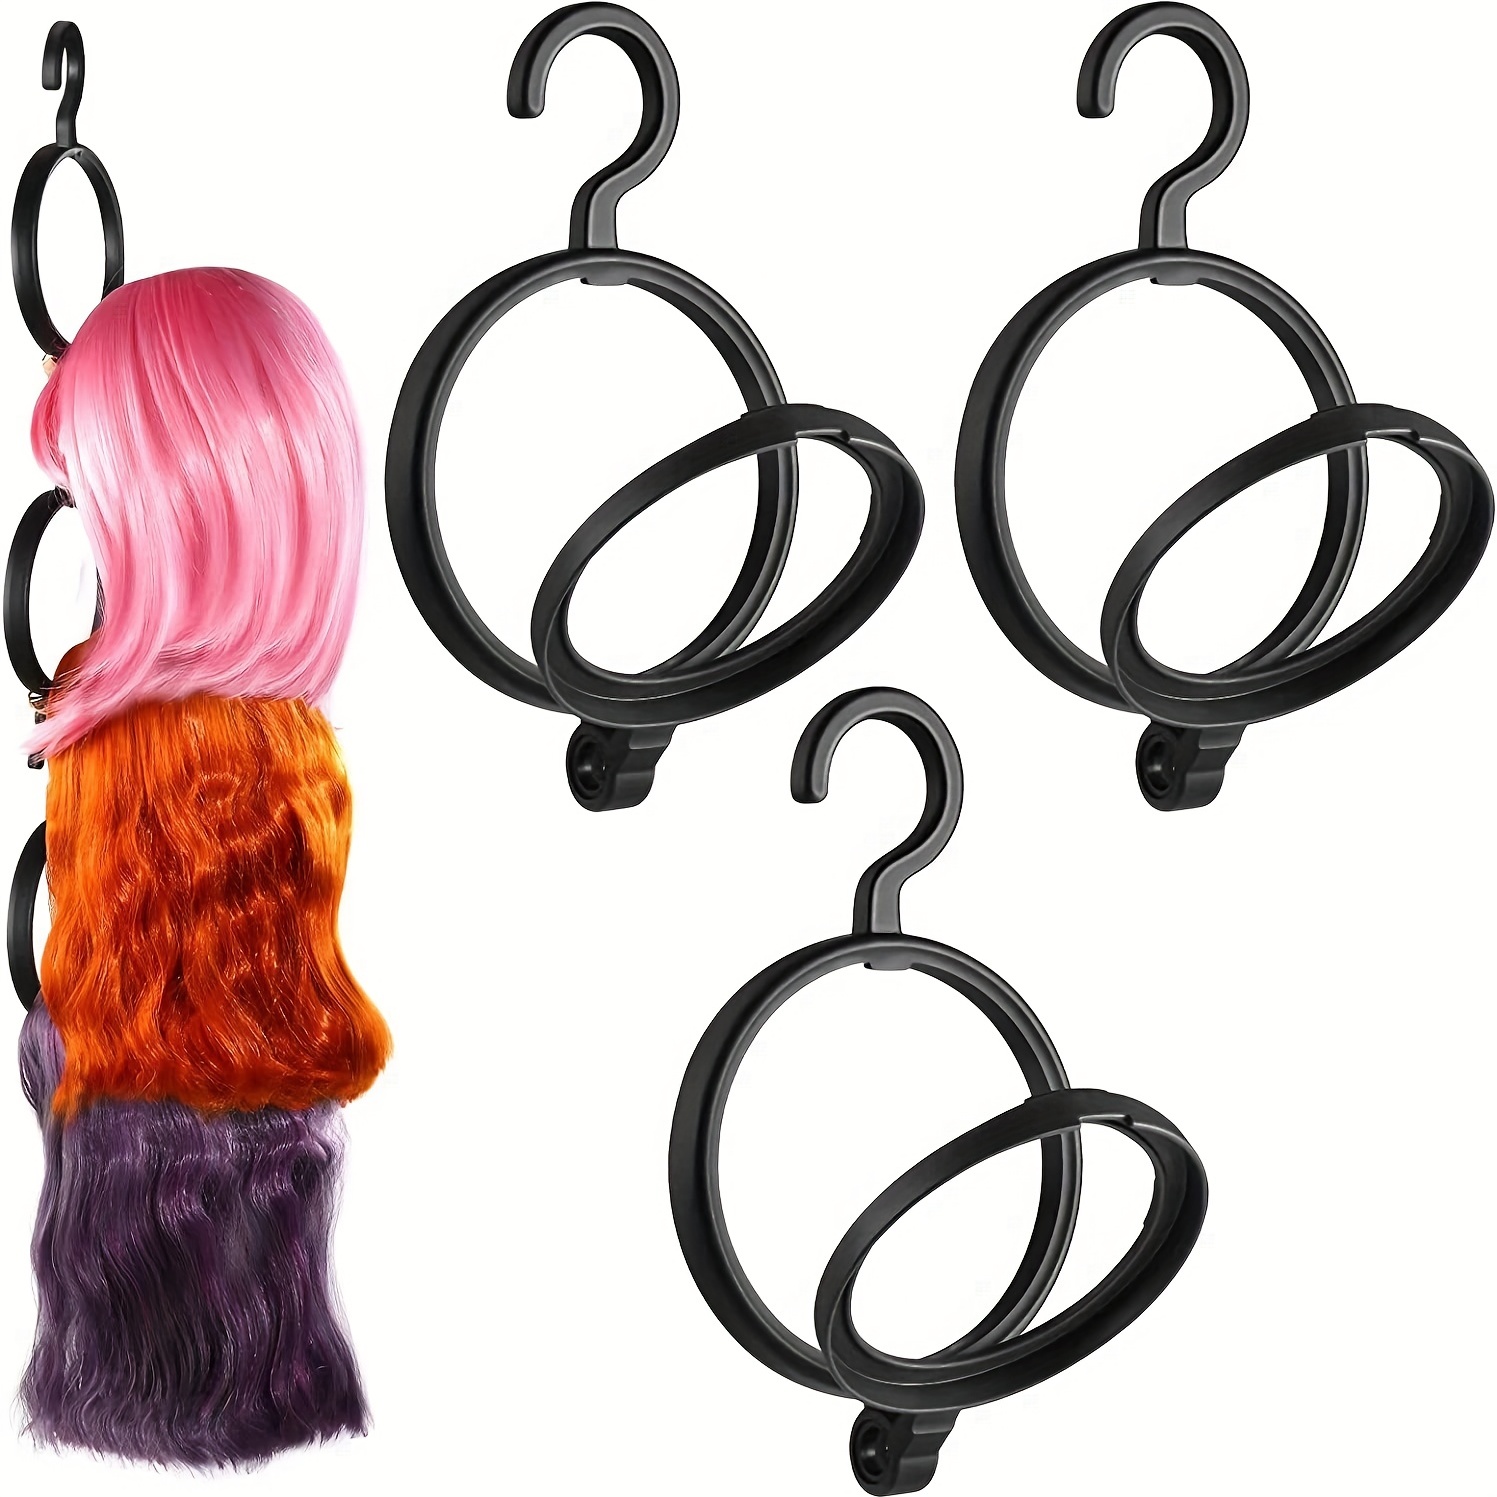 suidie Wig Hanger Hat Stand Flexible ABS Collapsible Holder